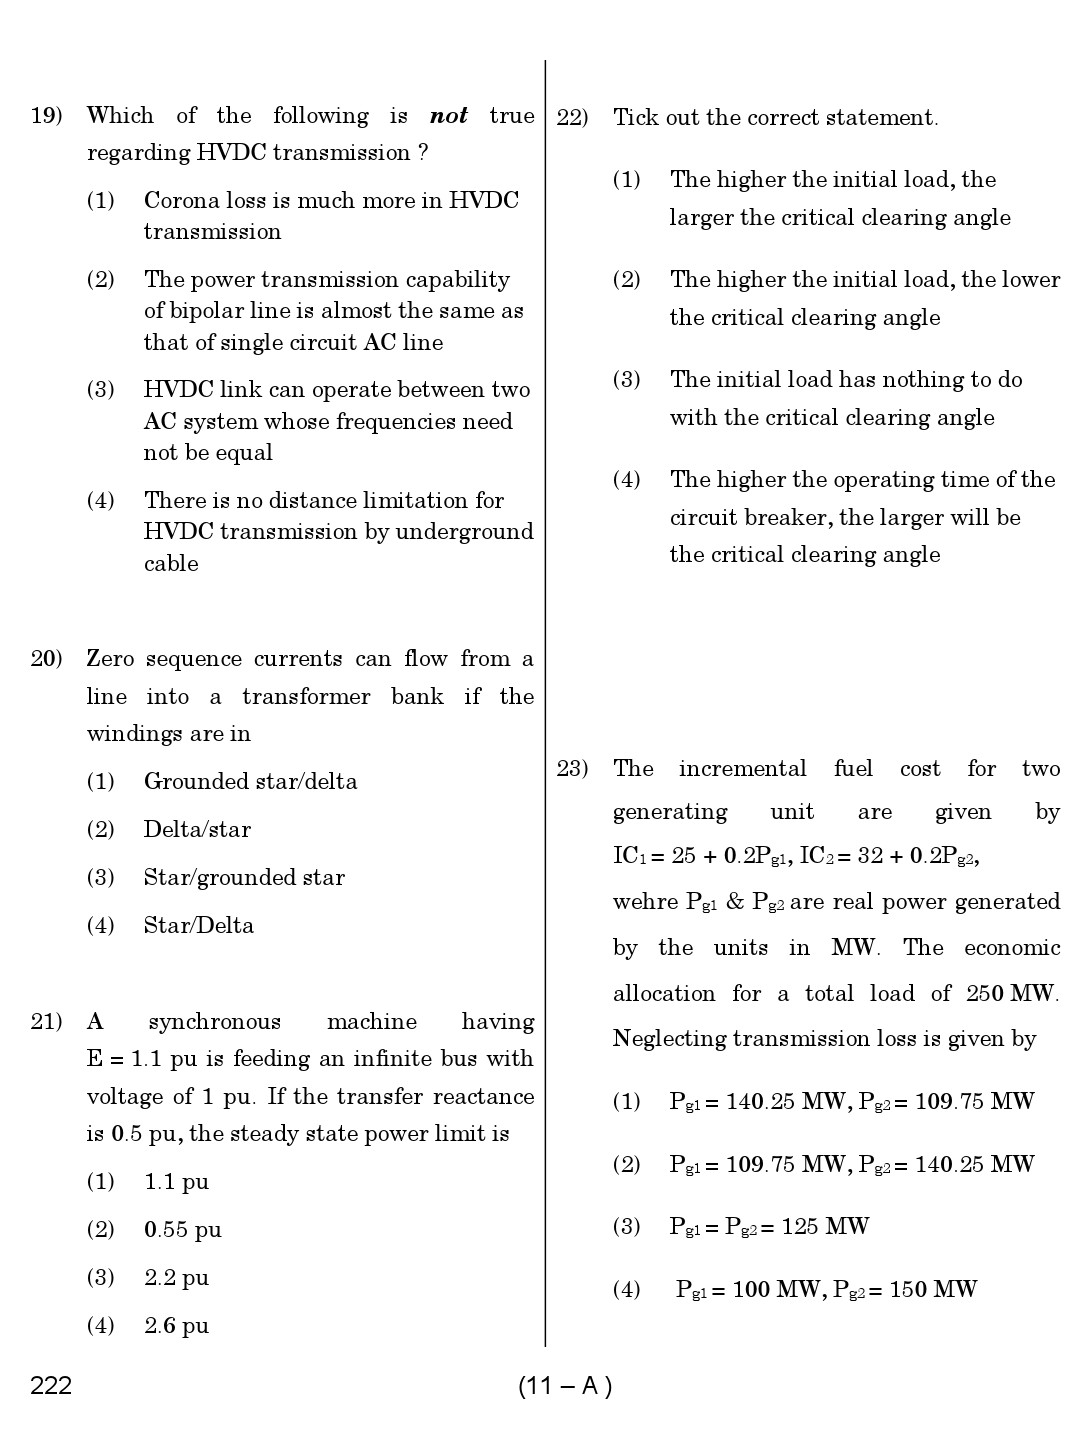 Karnataka PSC Assistant Engineer Electrical Exam Sample Question Paper 11